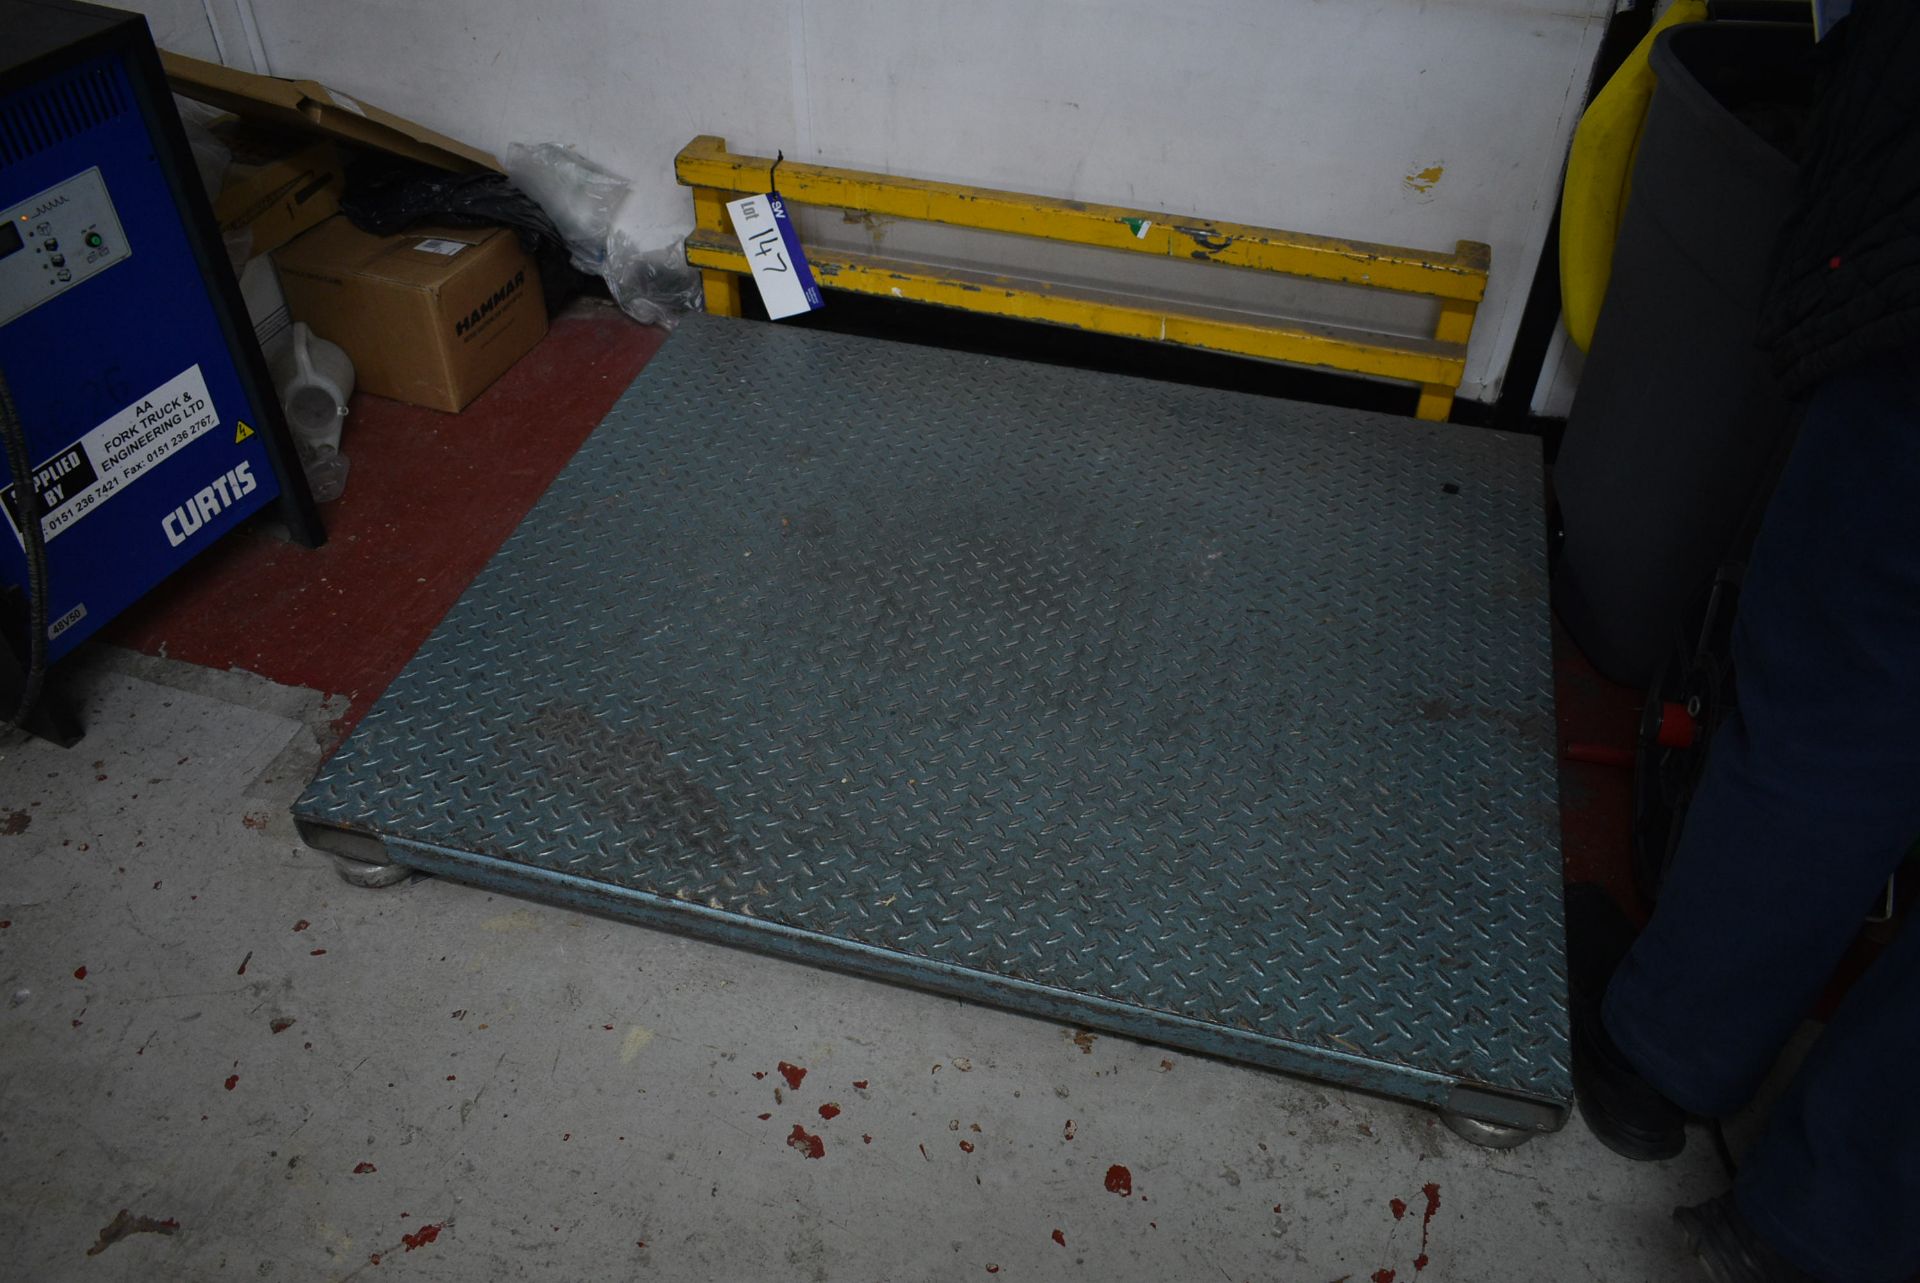 Digital Load Cell Weighing Platform, approx. 1.45m x 1.2m, with Leon Engineering 2000kg digital read